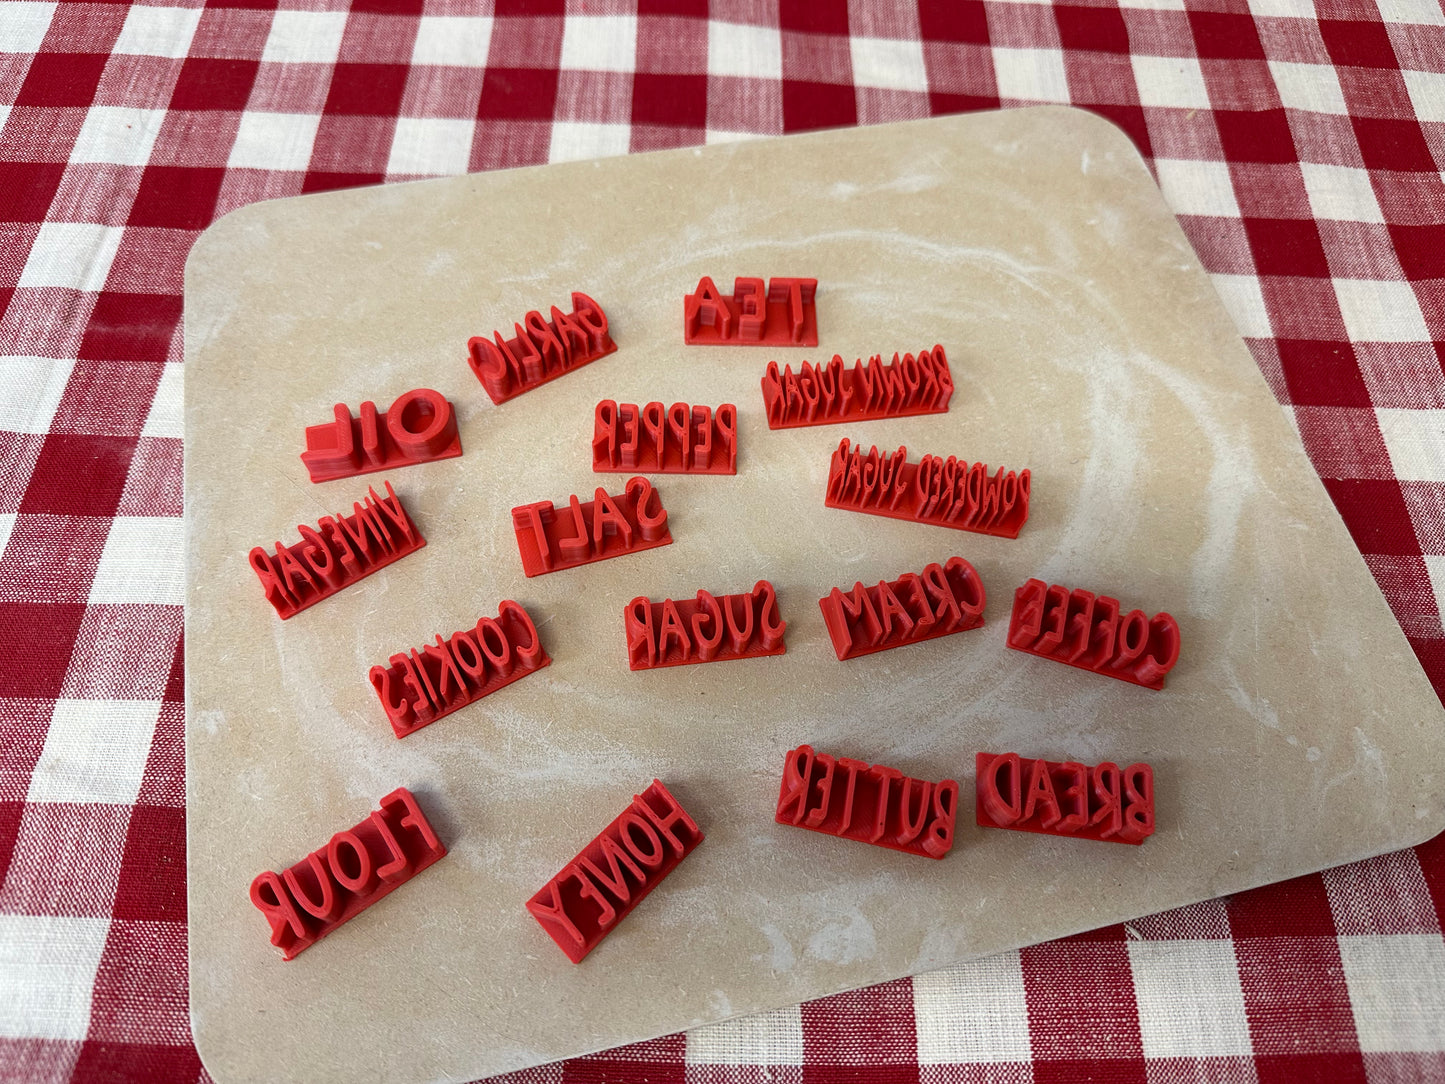 Household Word Pottery Stamps - soap, scent beads, laundry, etc, 3D Printed, each or set